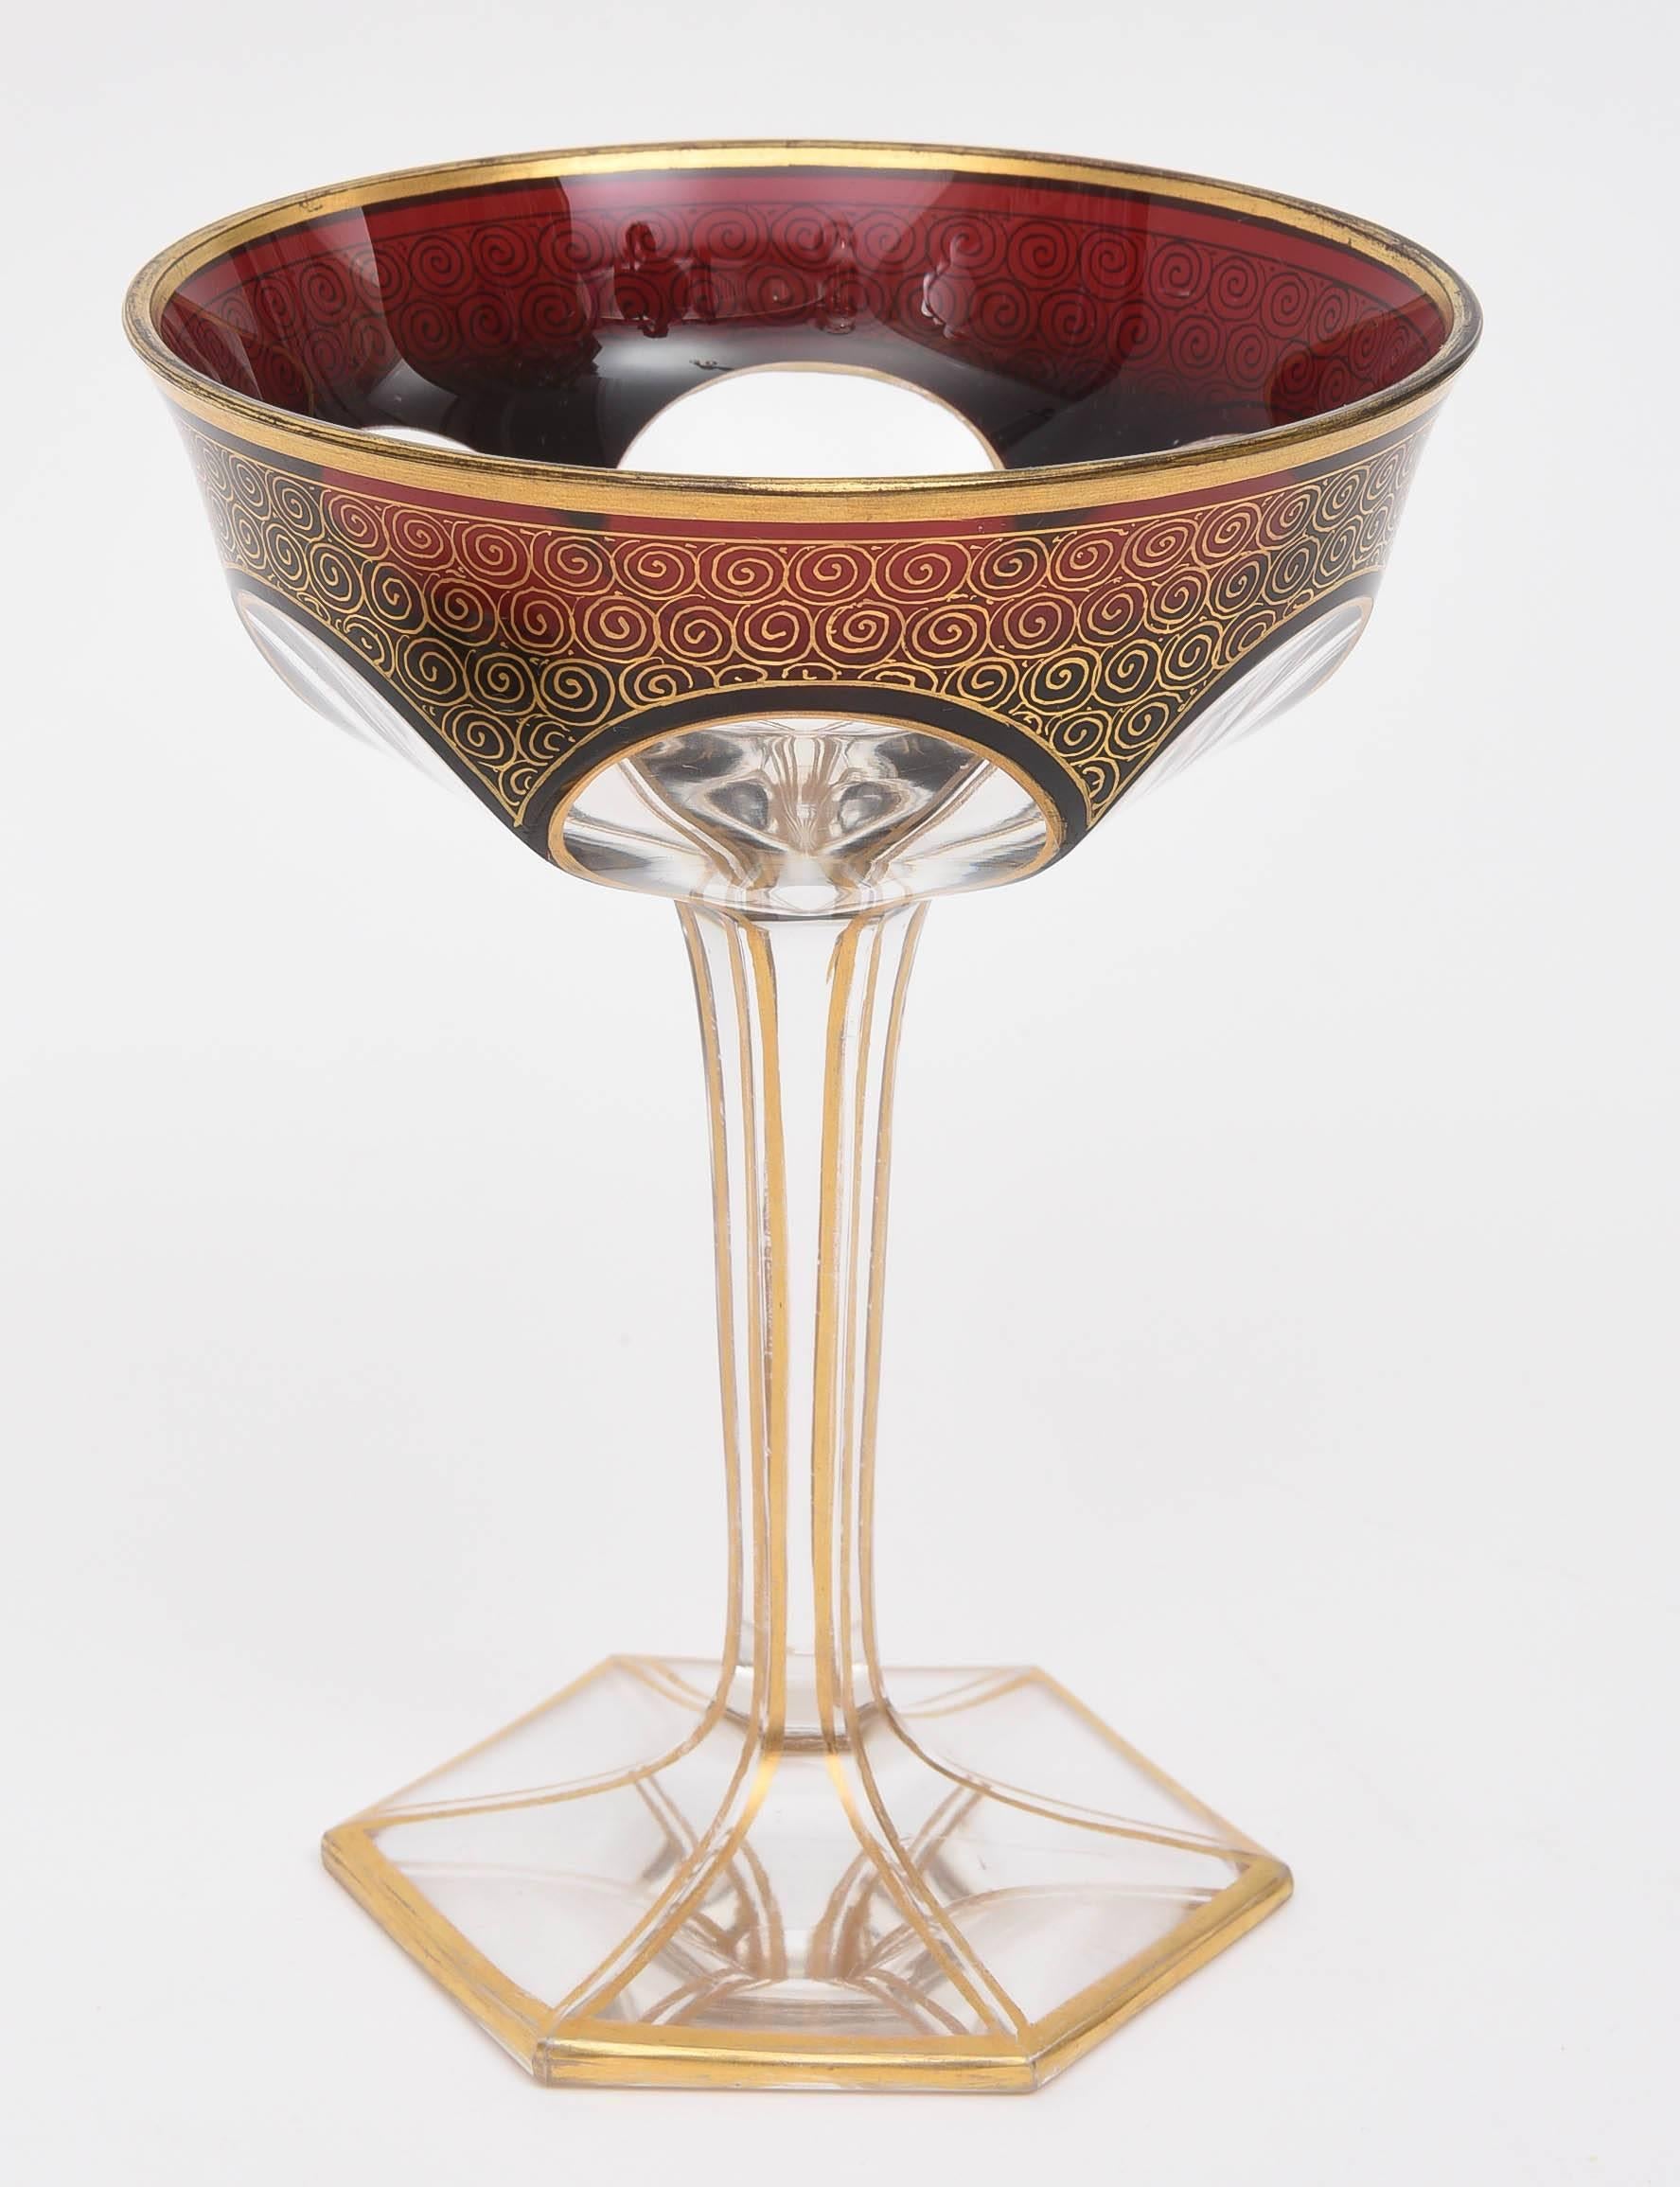 A scarce and hard to find service attributed to Moser, last quarter 19th century. A rich dark ruby cased and cut to clear design with shaped bases, elongated stems and petal form patterns. Swirls of hand gilt gold on the rich jewel colored ground as